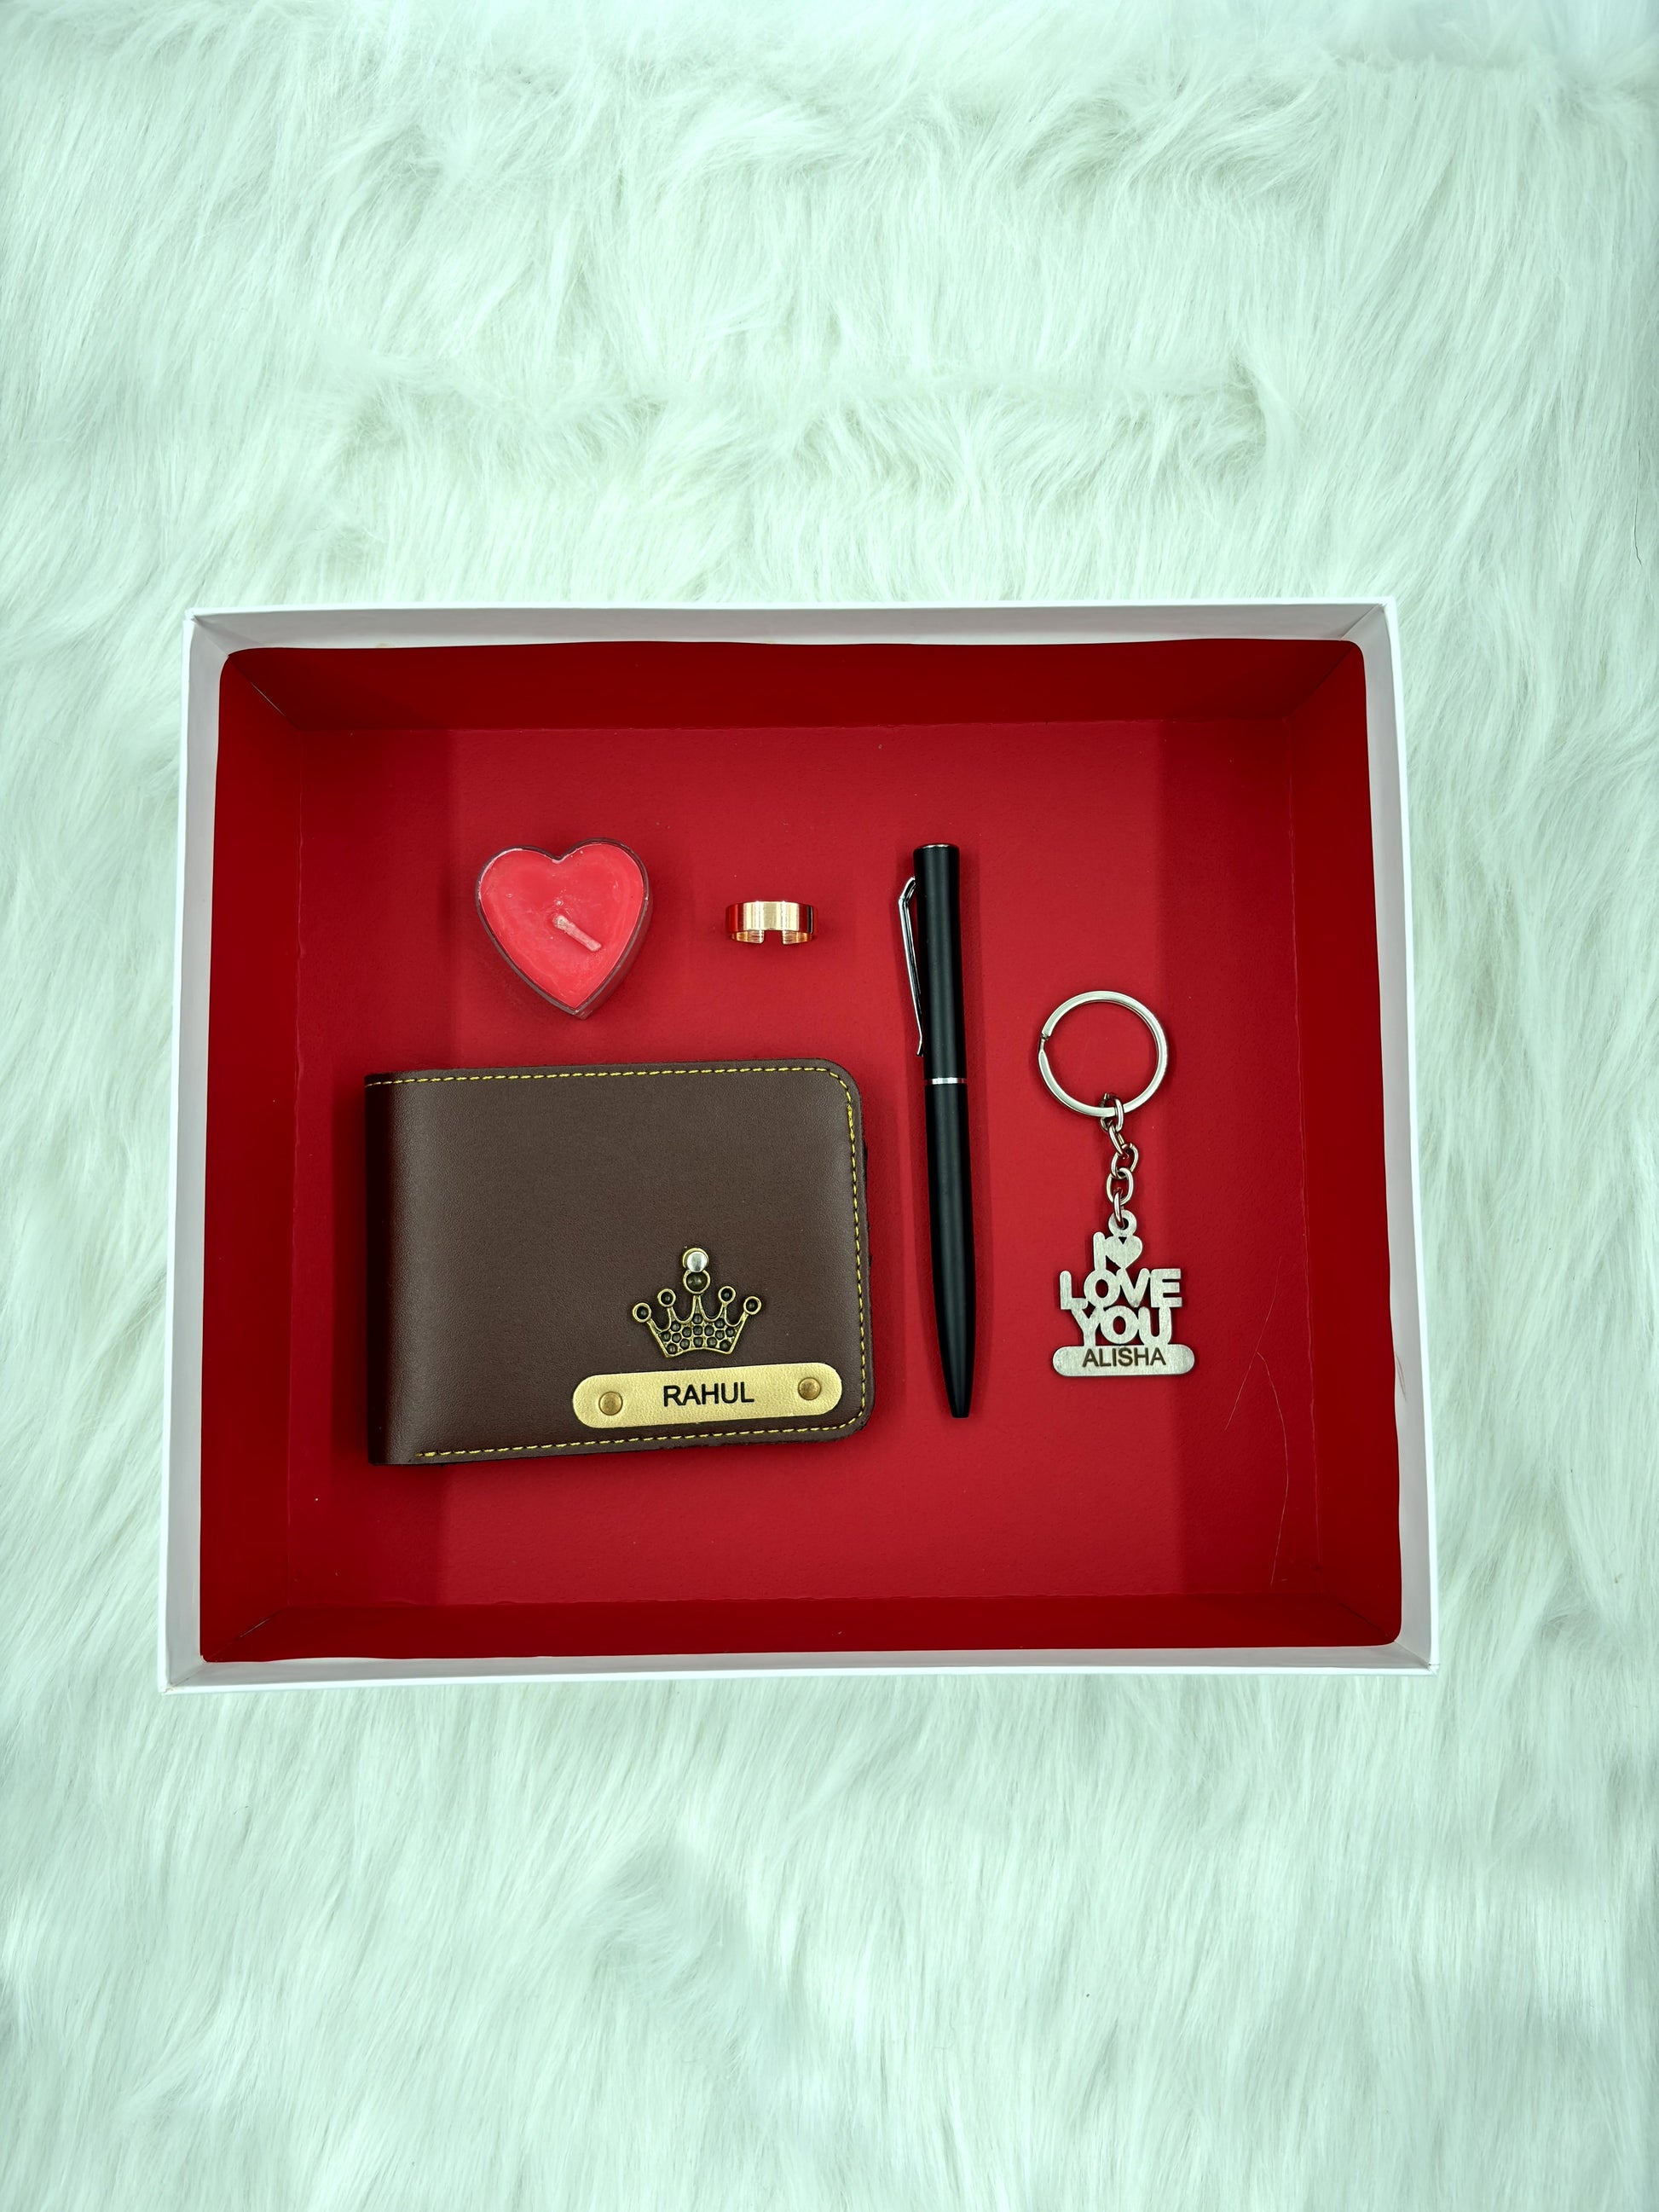 A top view of a box containing customized leather wallet, I Love You chocolate & keychain, pen, along with a gold rose and heart shaped sceneted candle